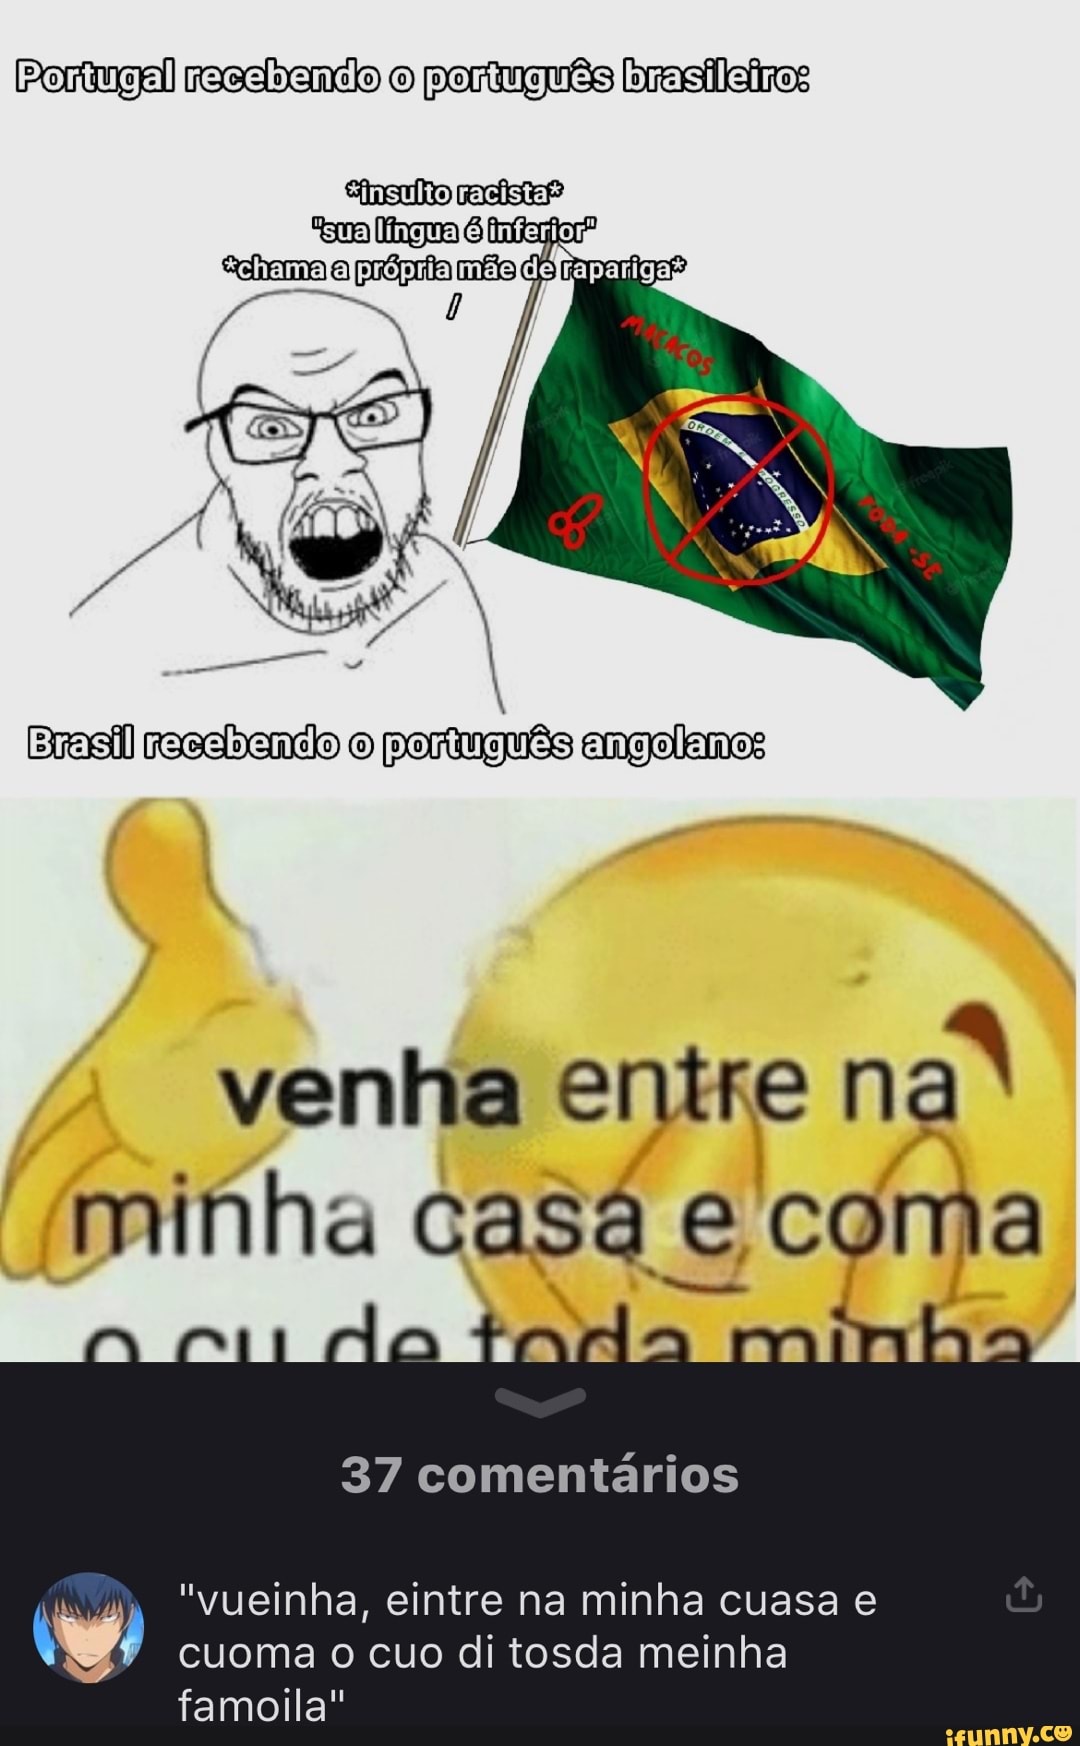 Picture memes kwhMR2uX9 by iCAP: 1 comment - iFunny Brazil